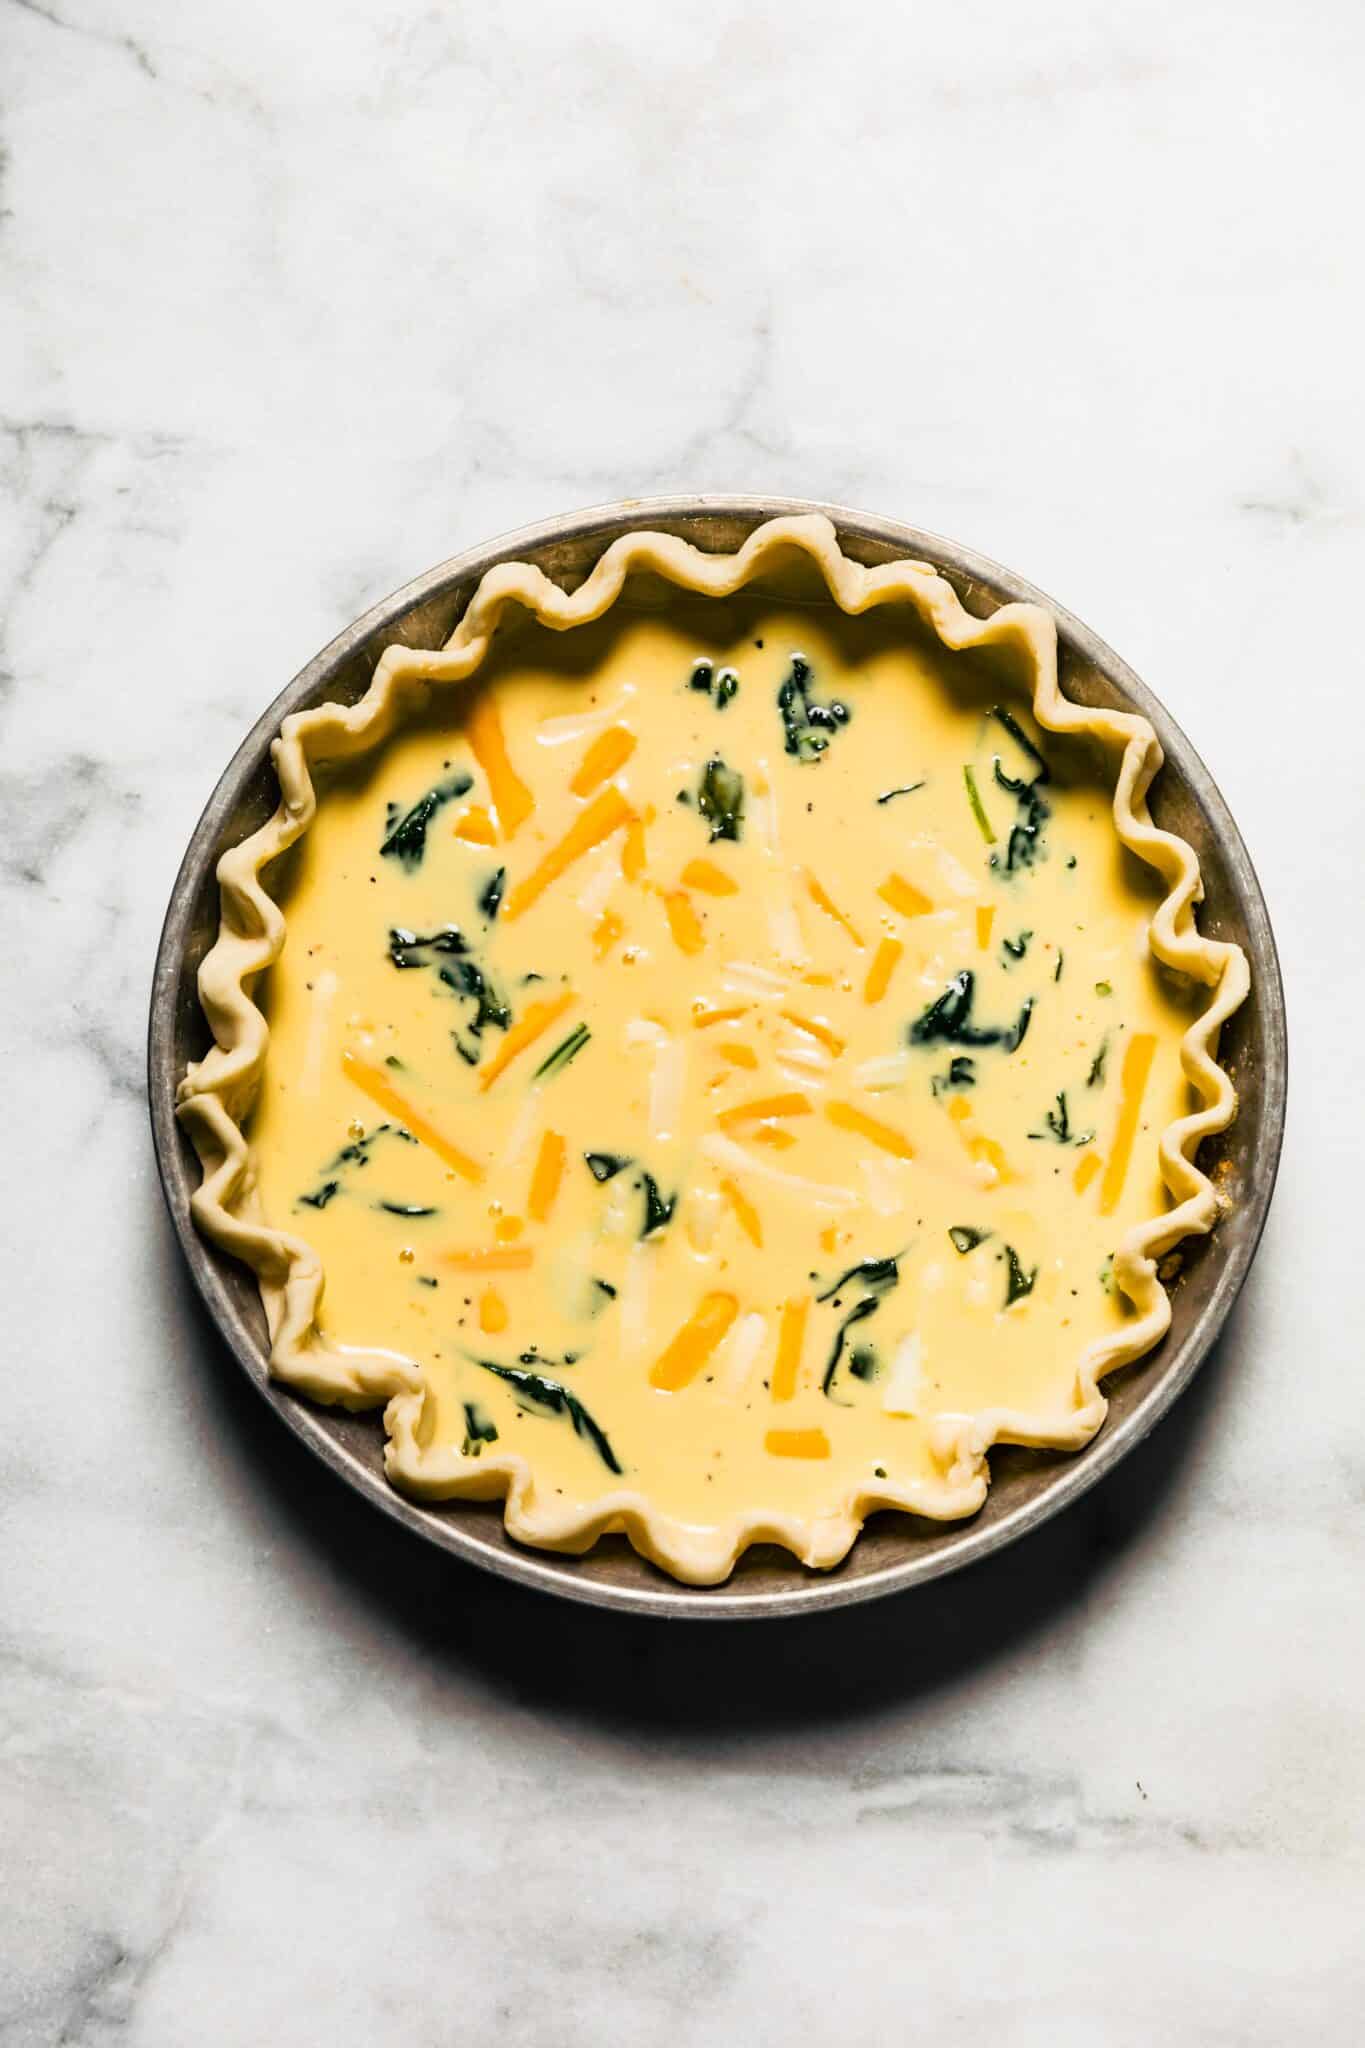 Egg batter with shredded cheese and spinach in a parbaked pie crust.